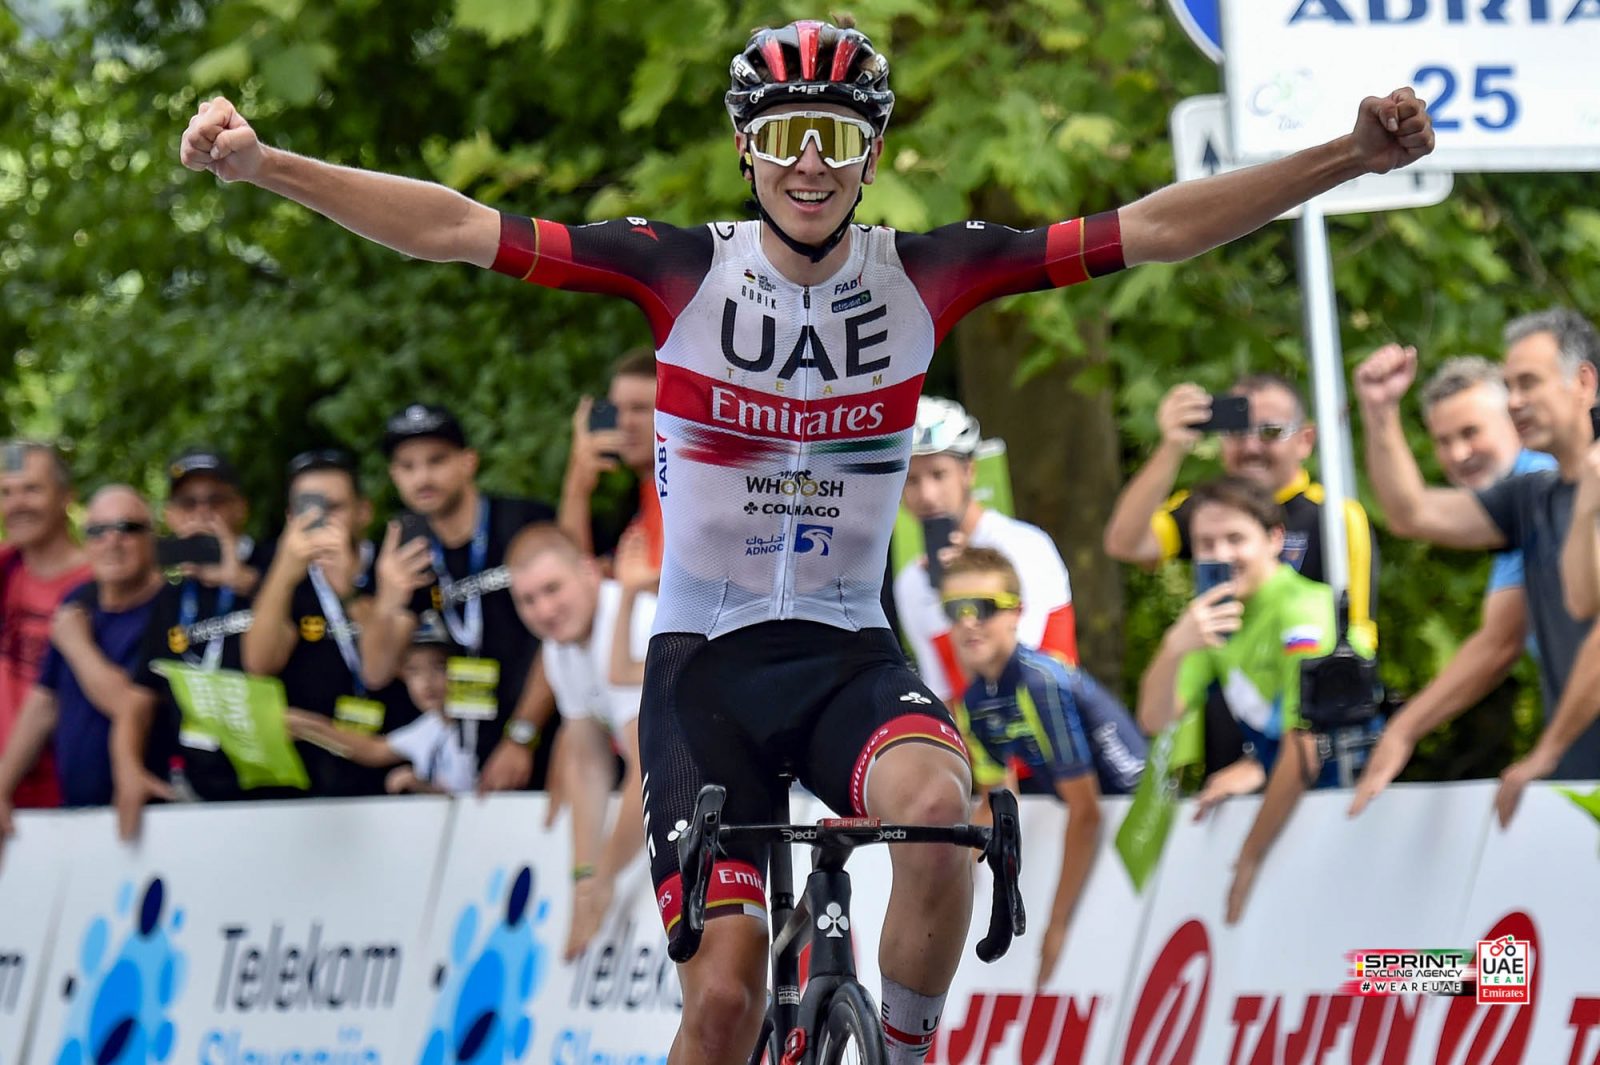 UAE Team Emirates, Tathej Pokhar’s plan: No Vuelta, but Canada, World Cup and Lombardy